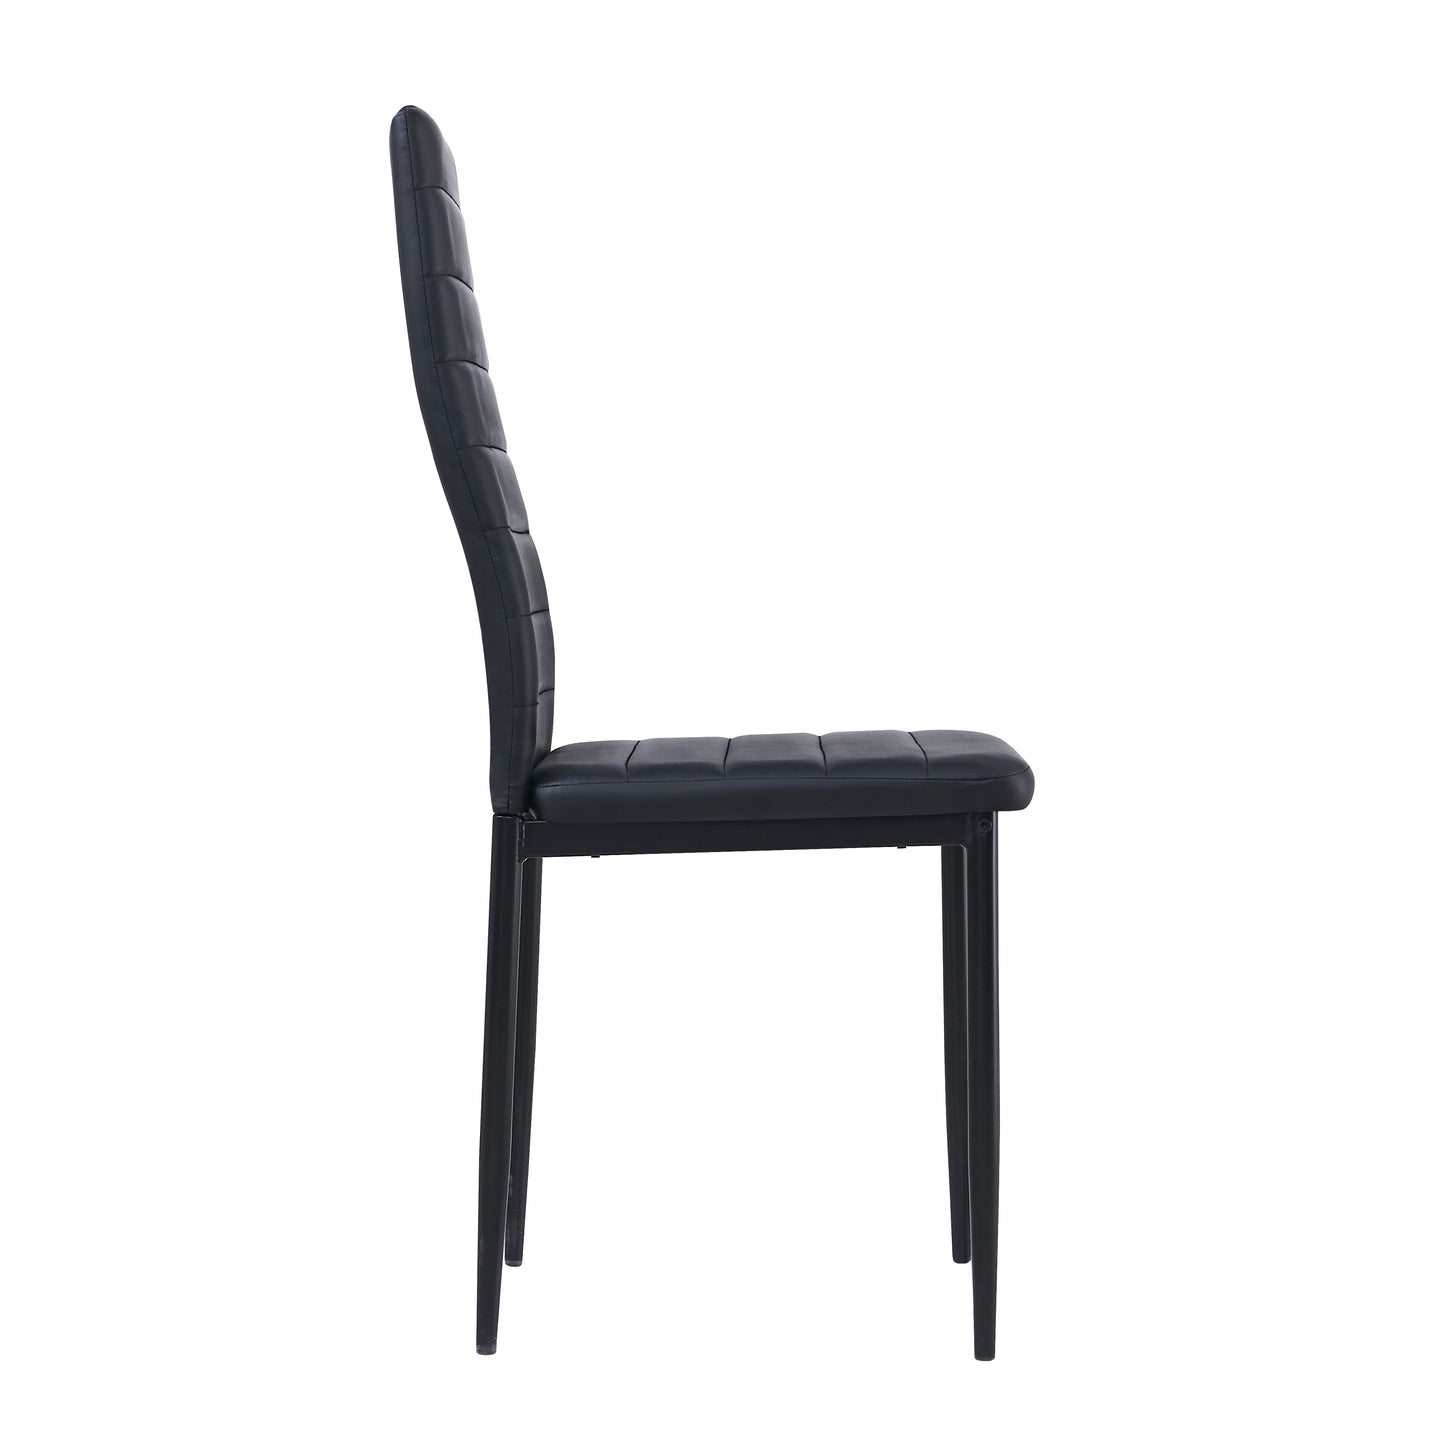 ANN Upholstered Dining Chair with Iron Legs - Black